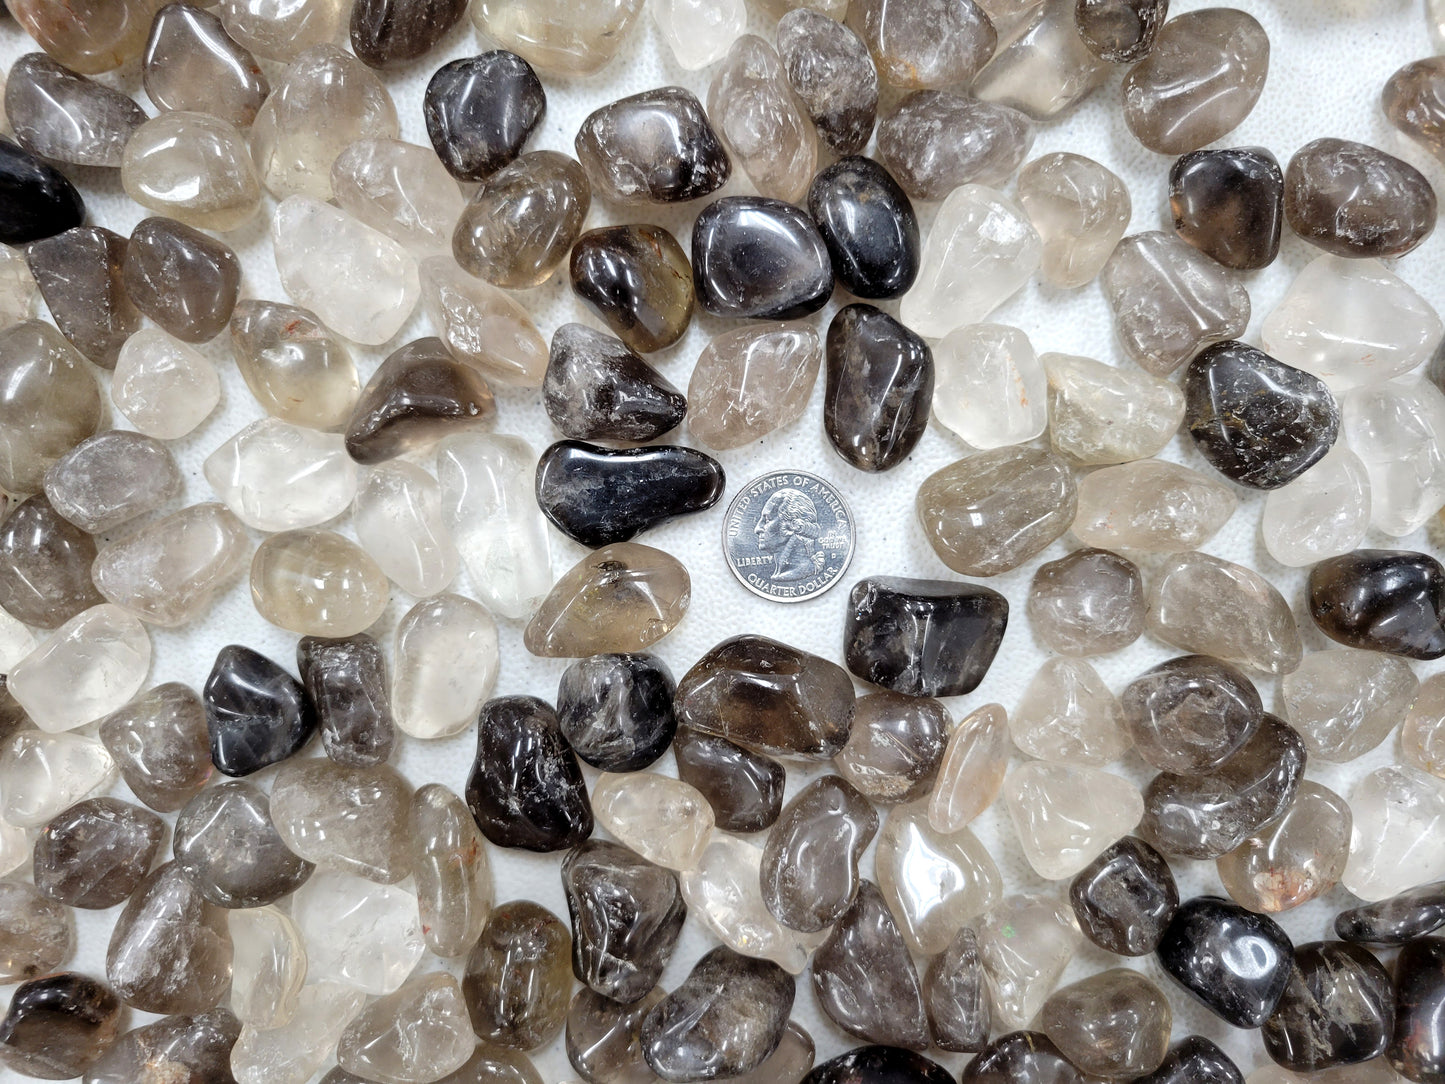 Bulk Tumbled Smoky Quartz Crystals - Size SMALL - 1/2 inch to 1 inch